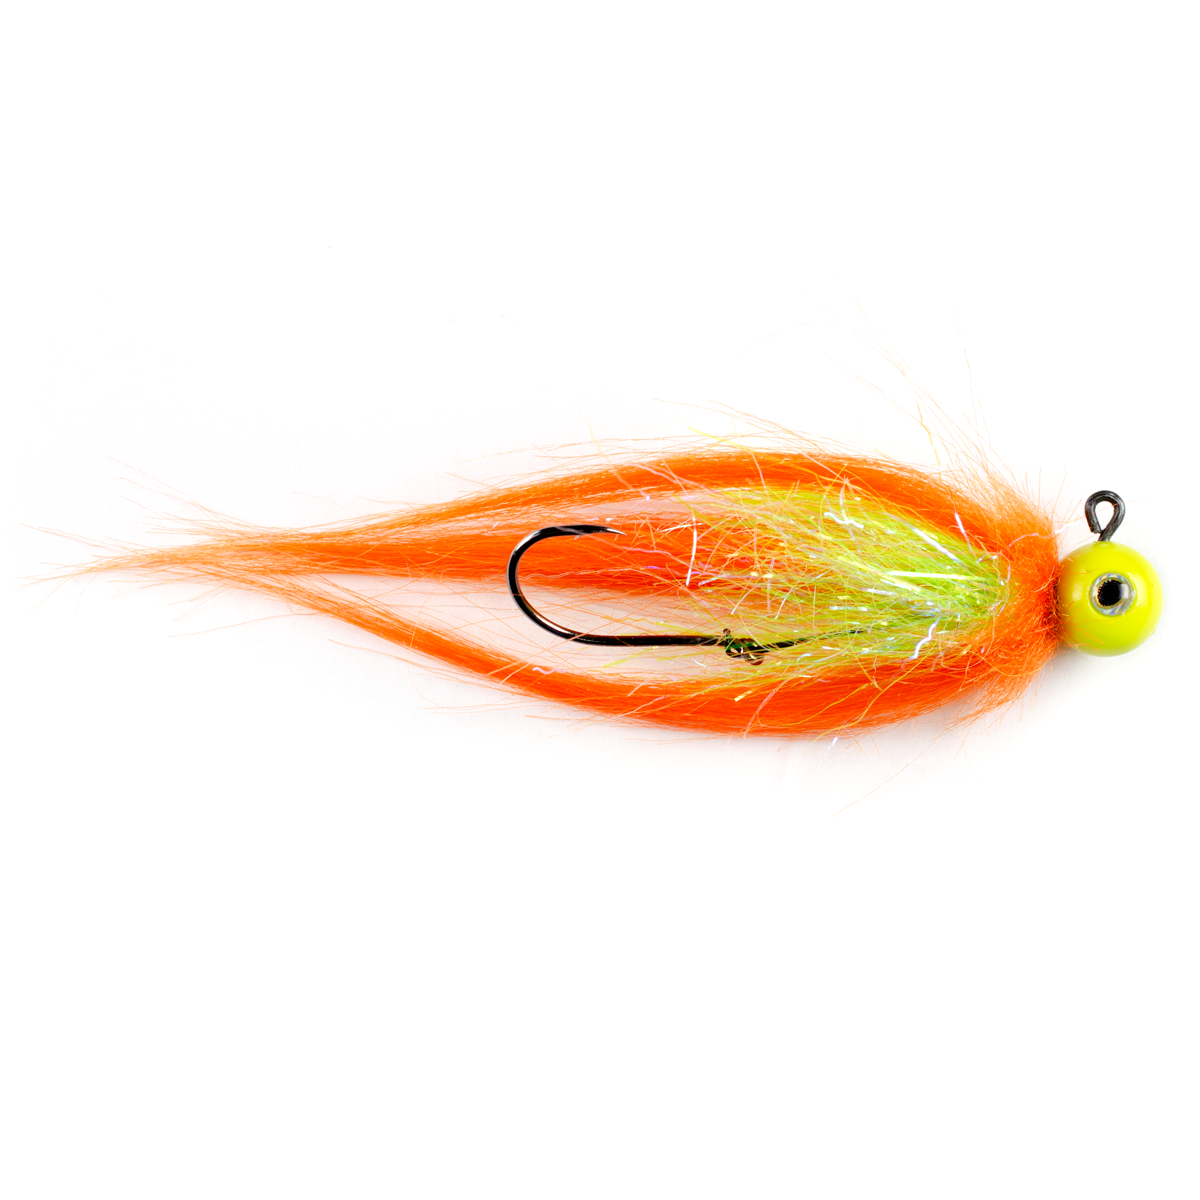 Chartreuse quarter ounce jig head with orange Fair Flies fly fur collar and wings, with chartreuse Fair Flies fly fur and clear flash skirting materials